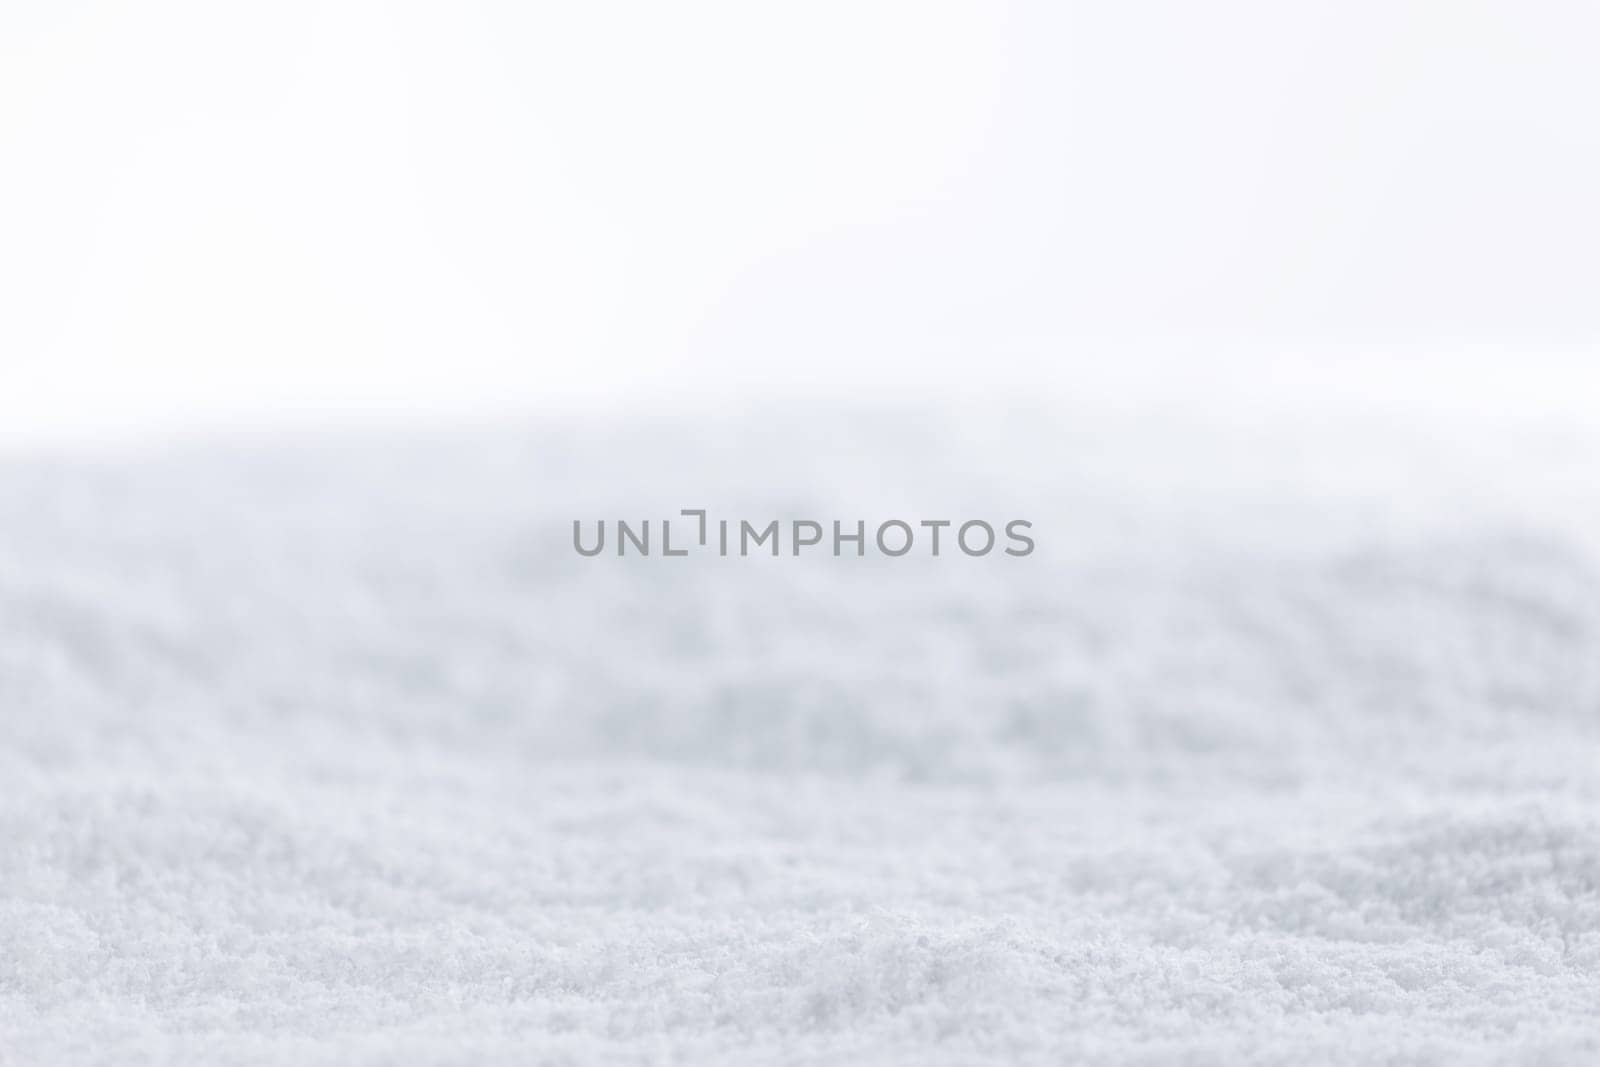 Heap of snow on white background, Christmas winter design element